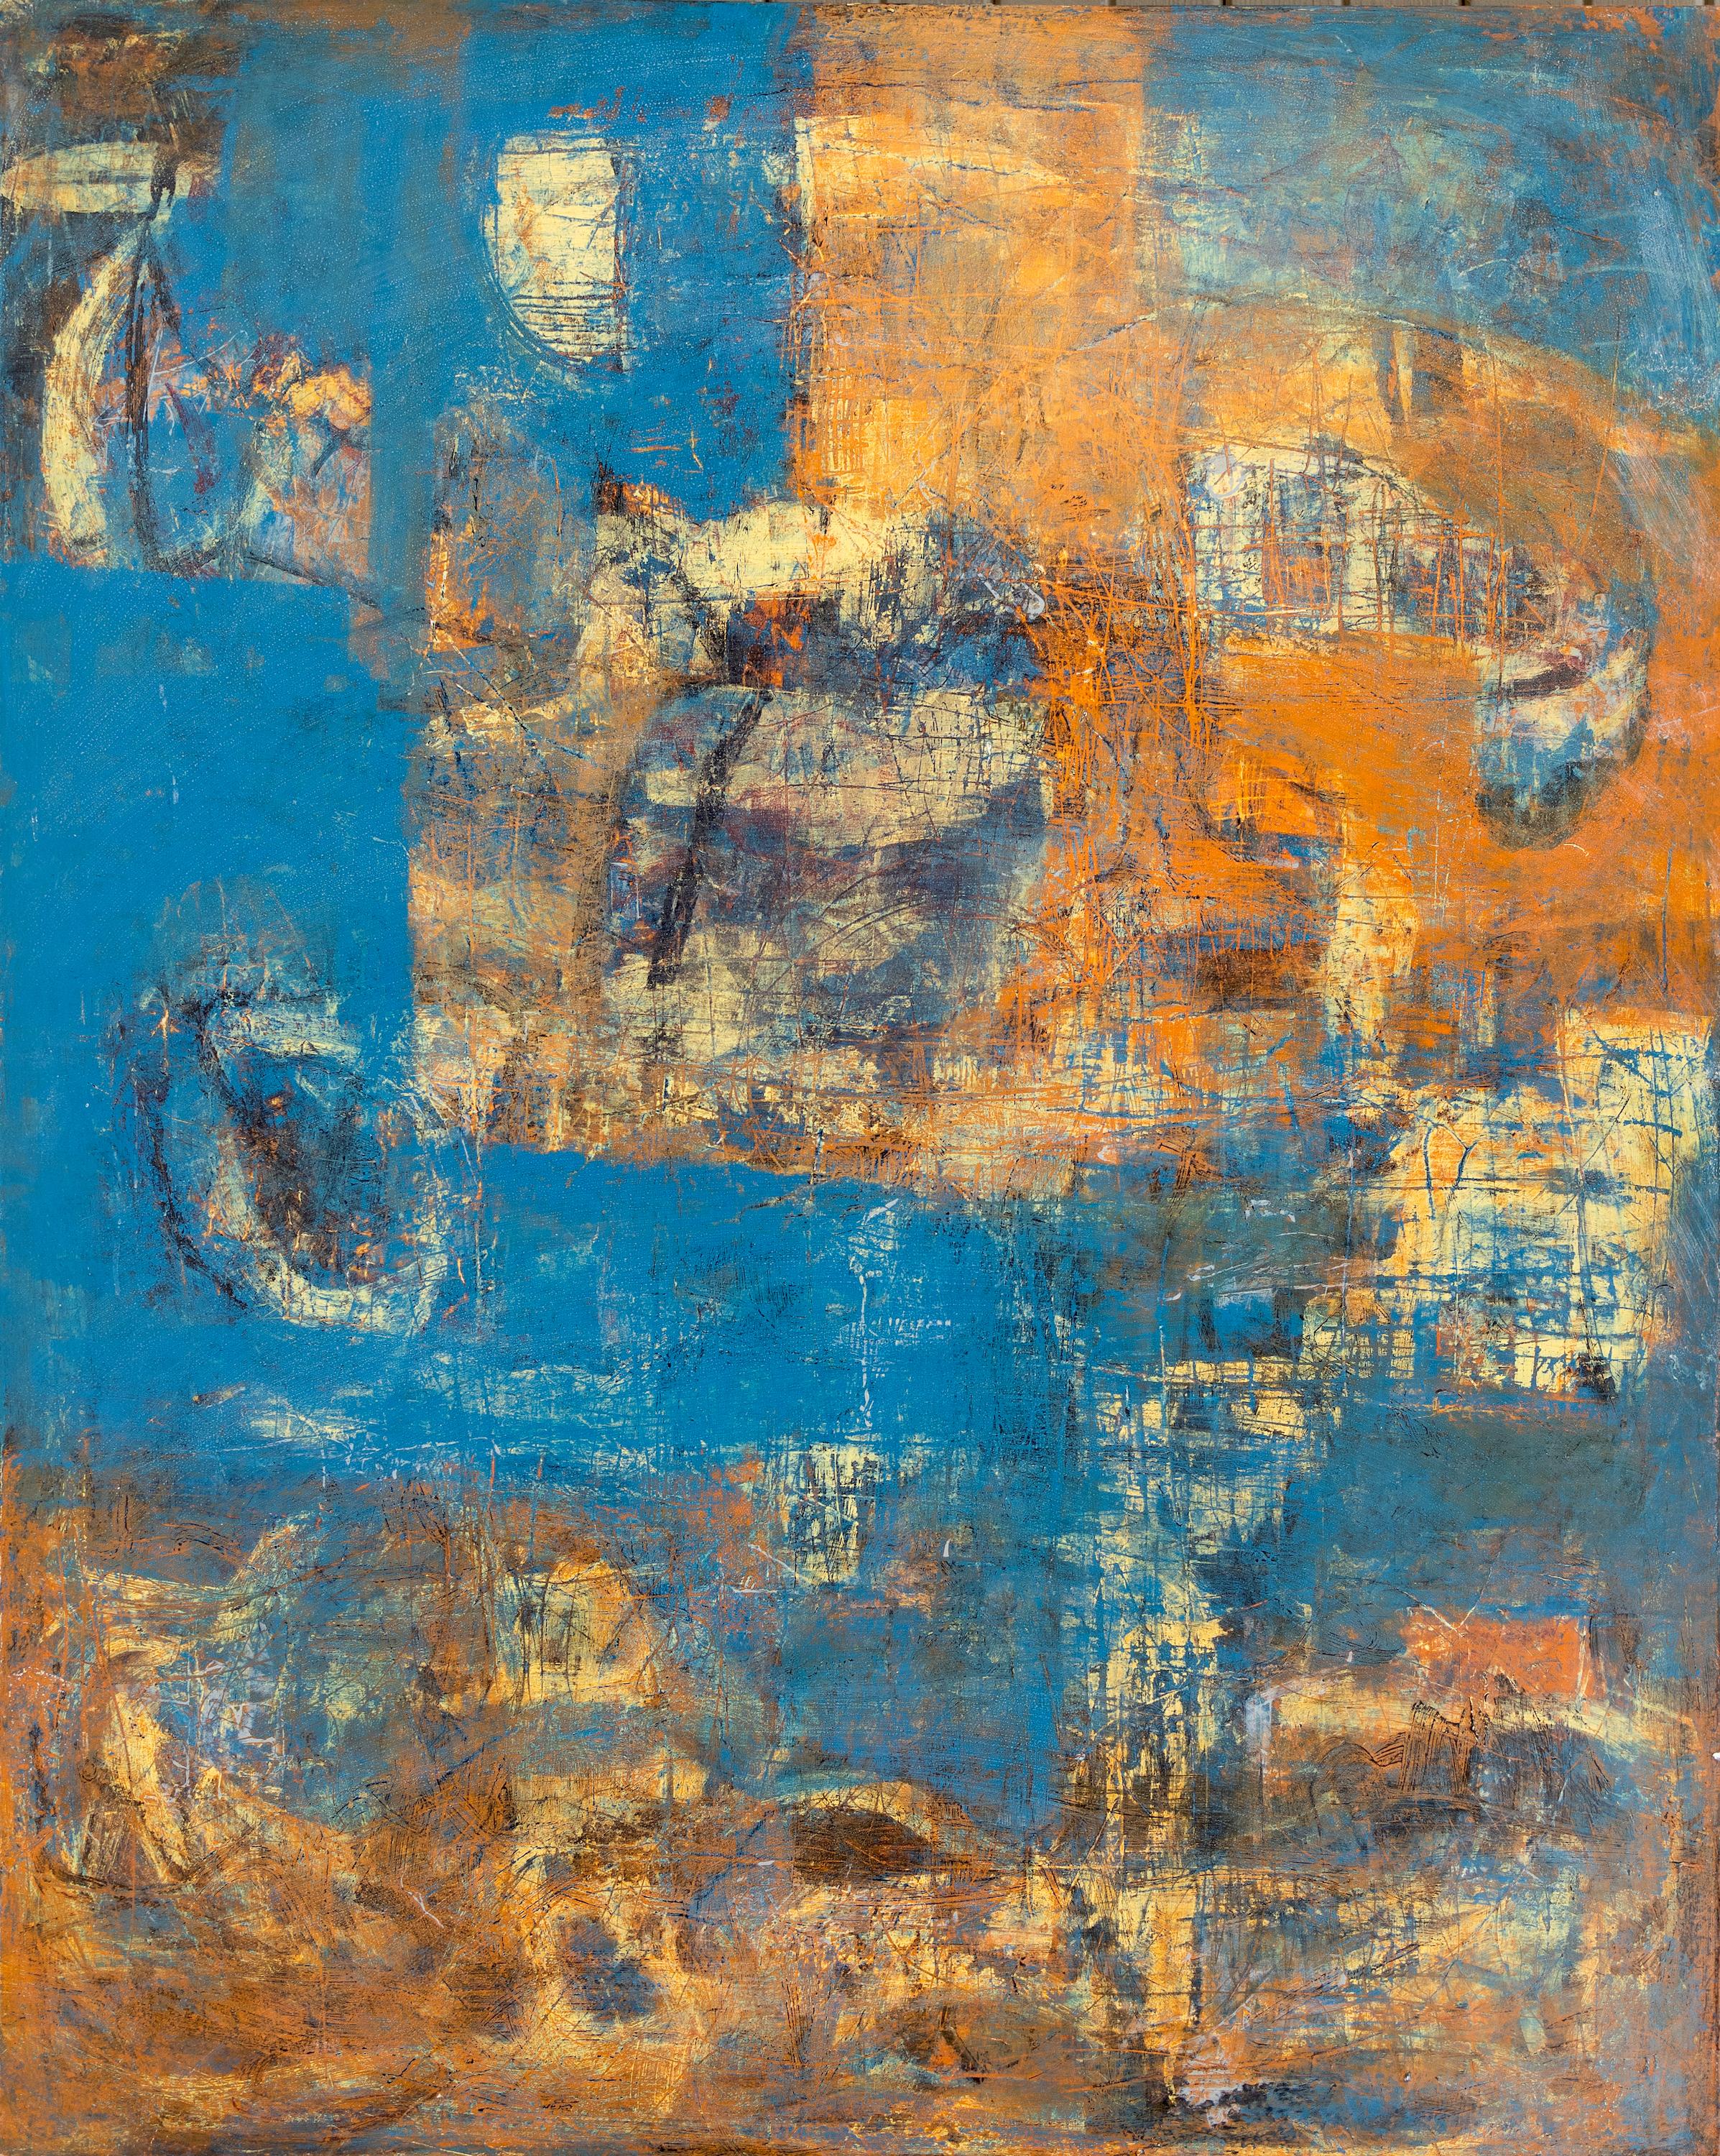 Blue, Orange, and Yellow Abstract - Painting by Tom Reno